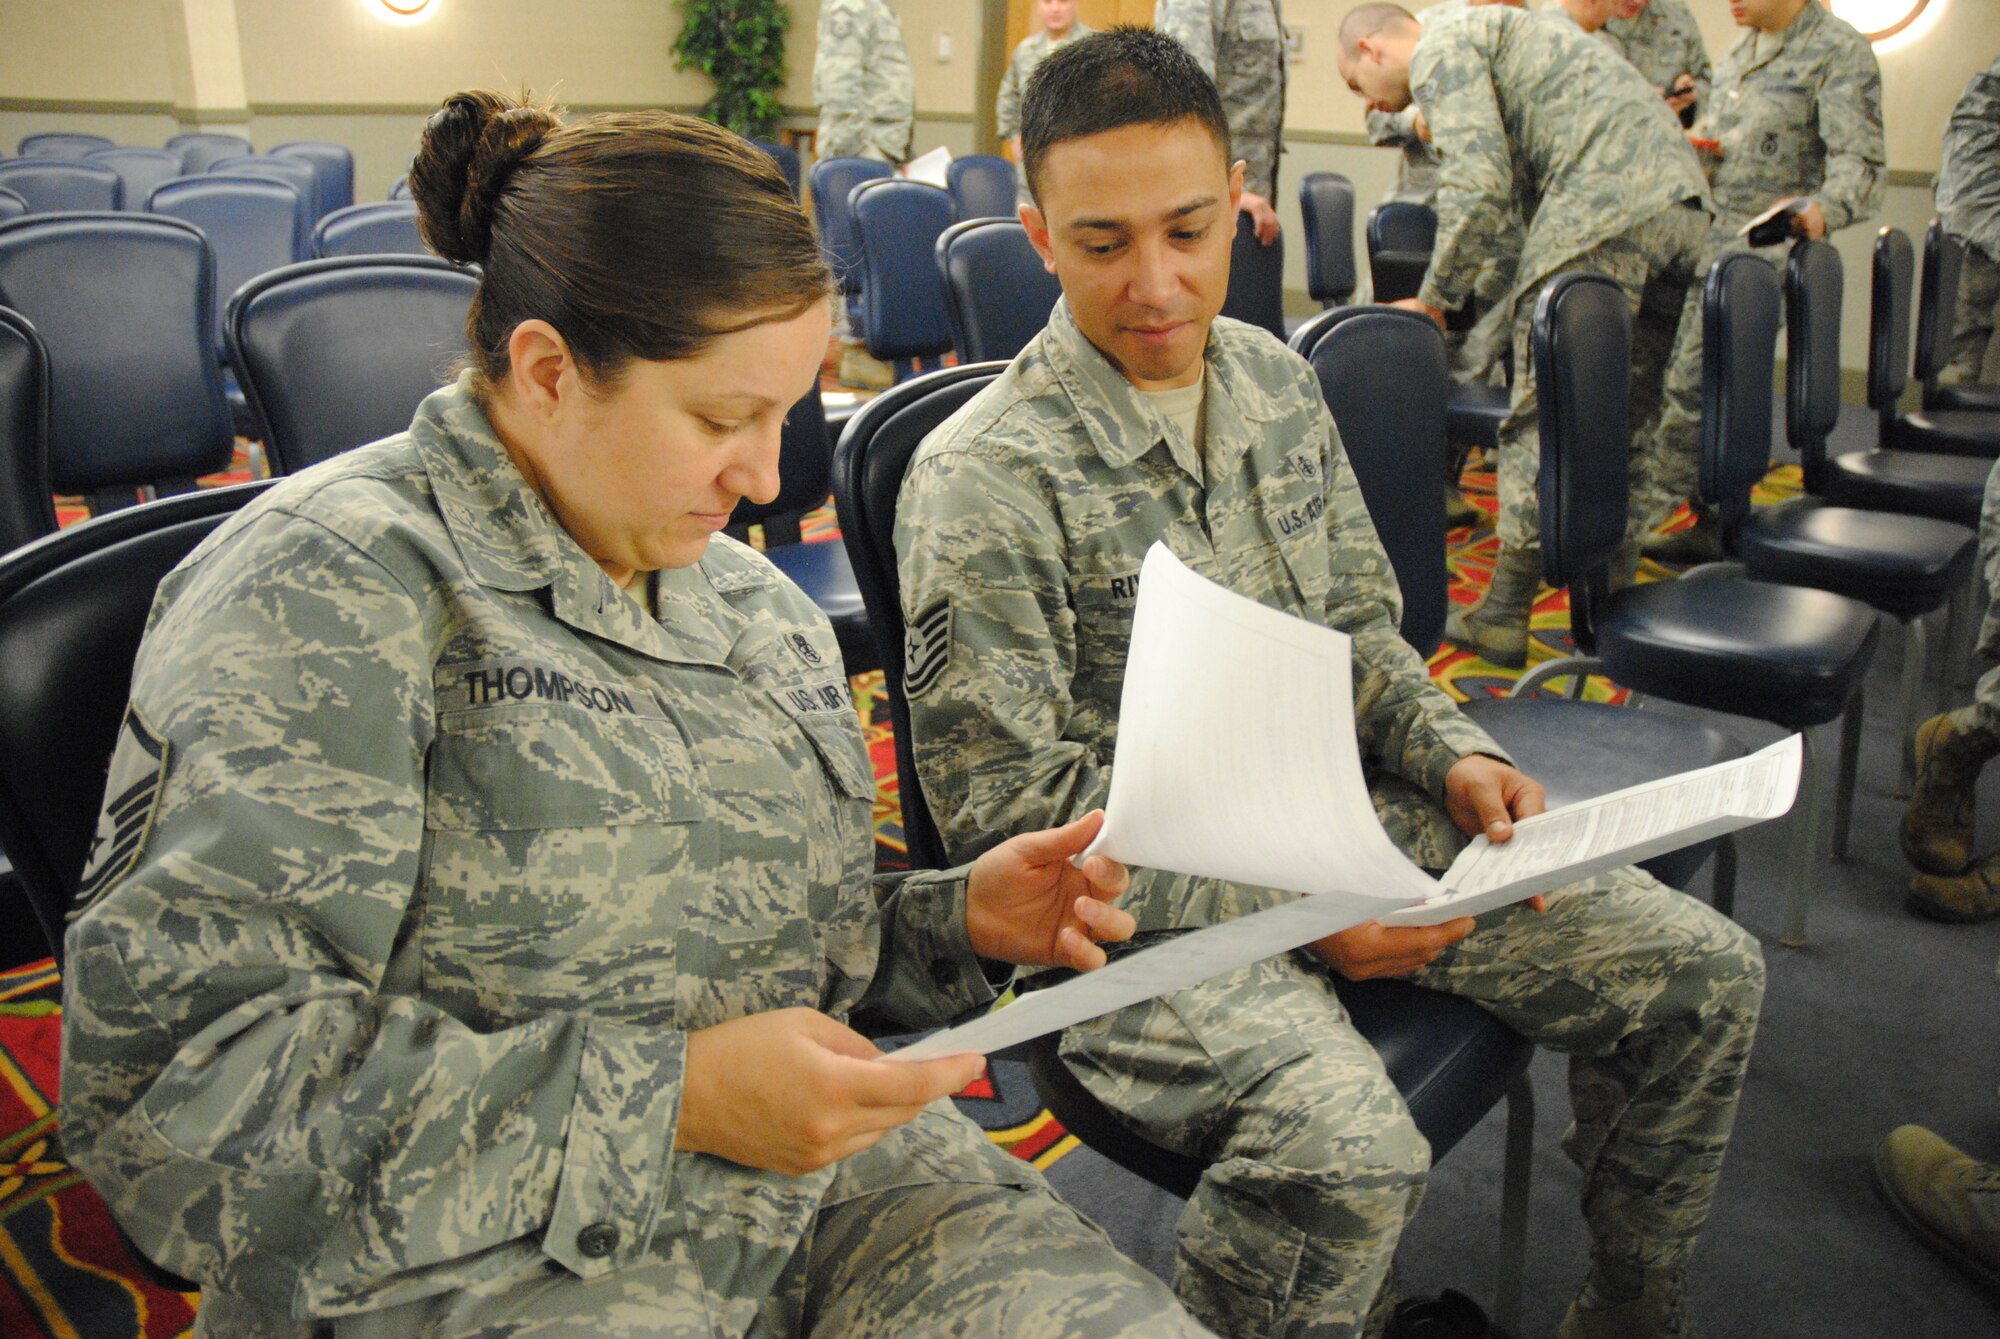 Master Sgt. Becky Thompson and Tech. Sgt. Juan Rivera of the 319th Medical Support Squadron familiarize themselves with forms used for the Airman Comprehensive Assessment after a mandatory town hall meeting for all supervisors,  June 25, 2014, at the Northern Lights Club on Grand Forks Air Force Base, N.D. The new evaluation system is scheduled to go into effect July 1, 2014. (U.S. Air Force photo/Staff Sgt. Luis Loza Gutierrez)